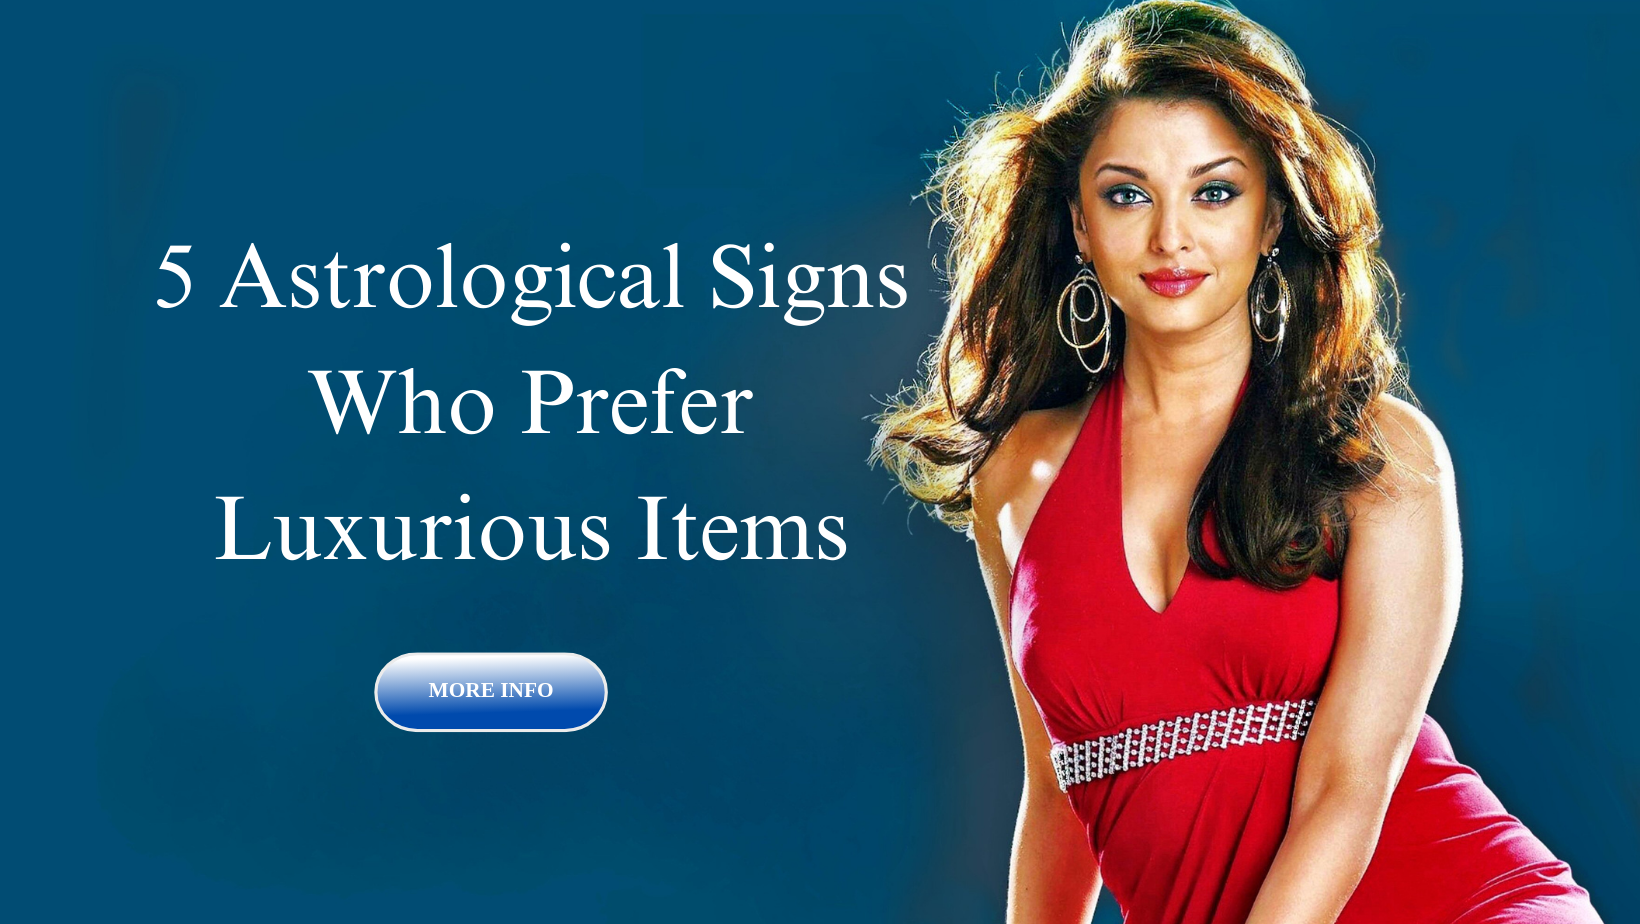 5 Astrological Signs Who Prefer Luxurious Items